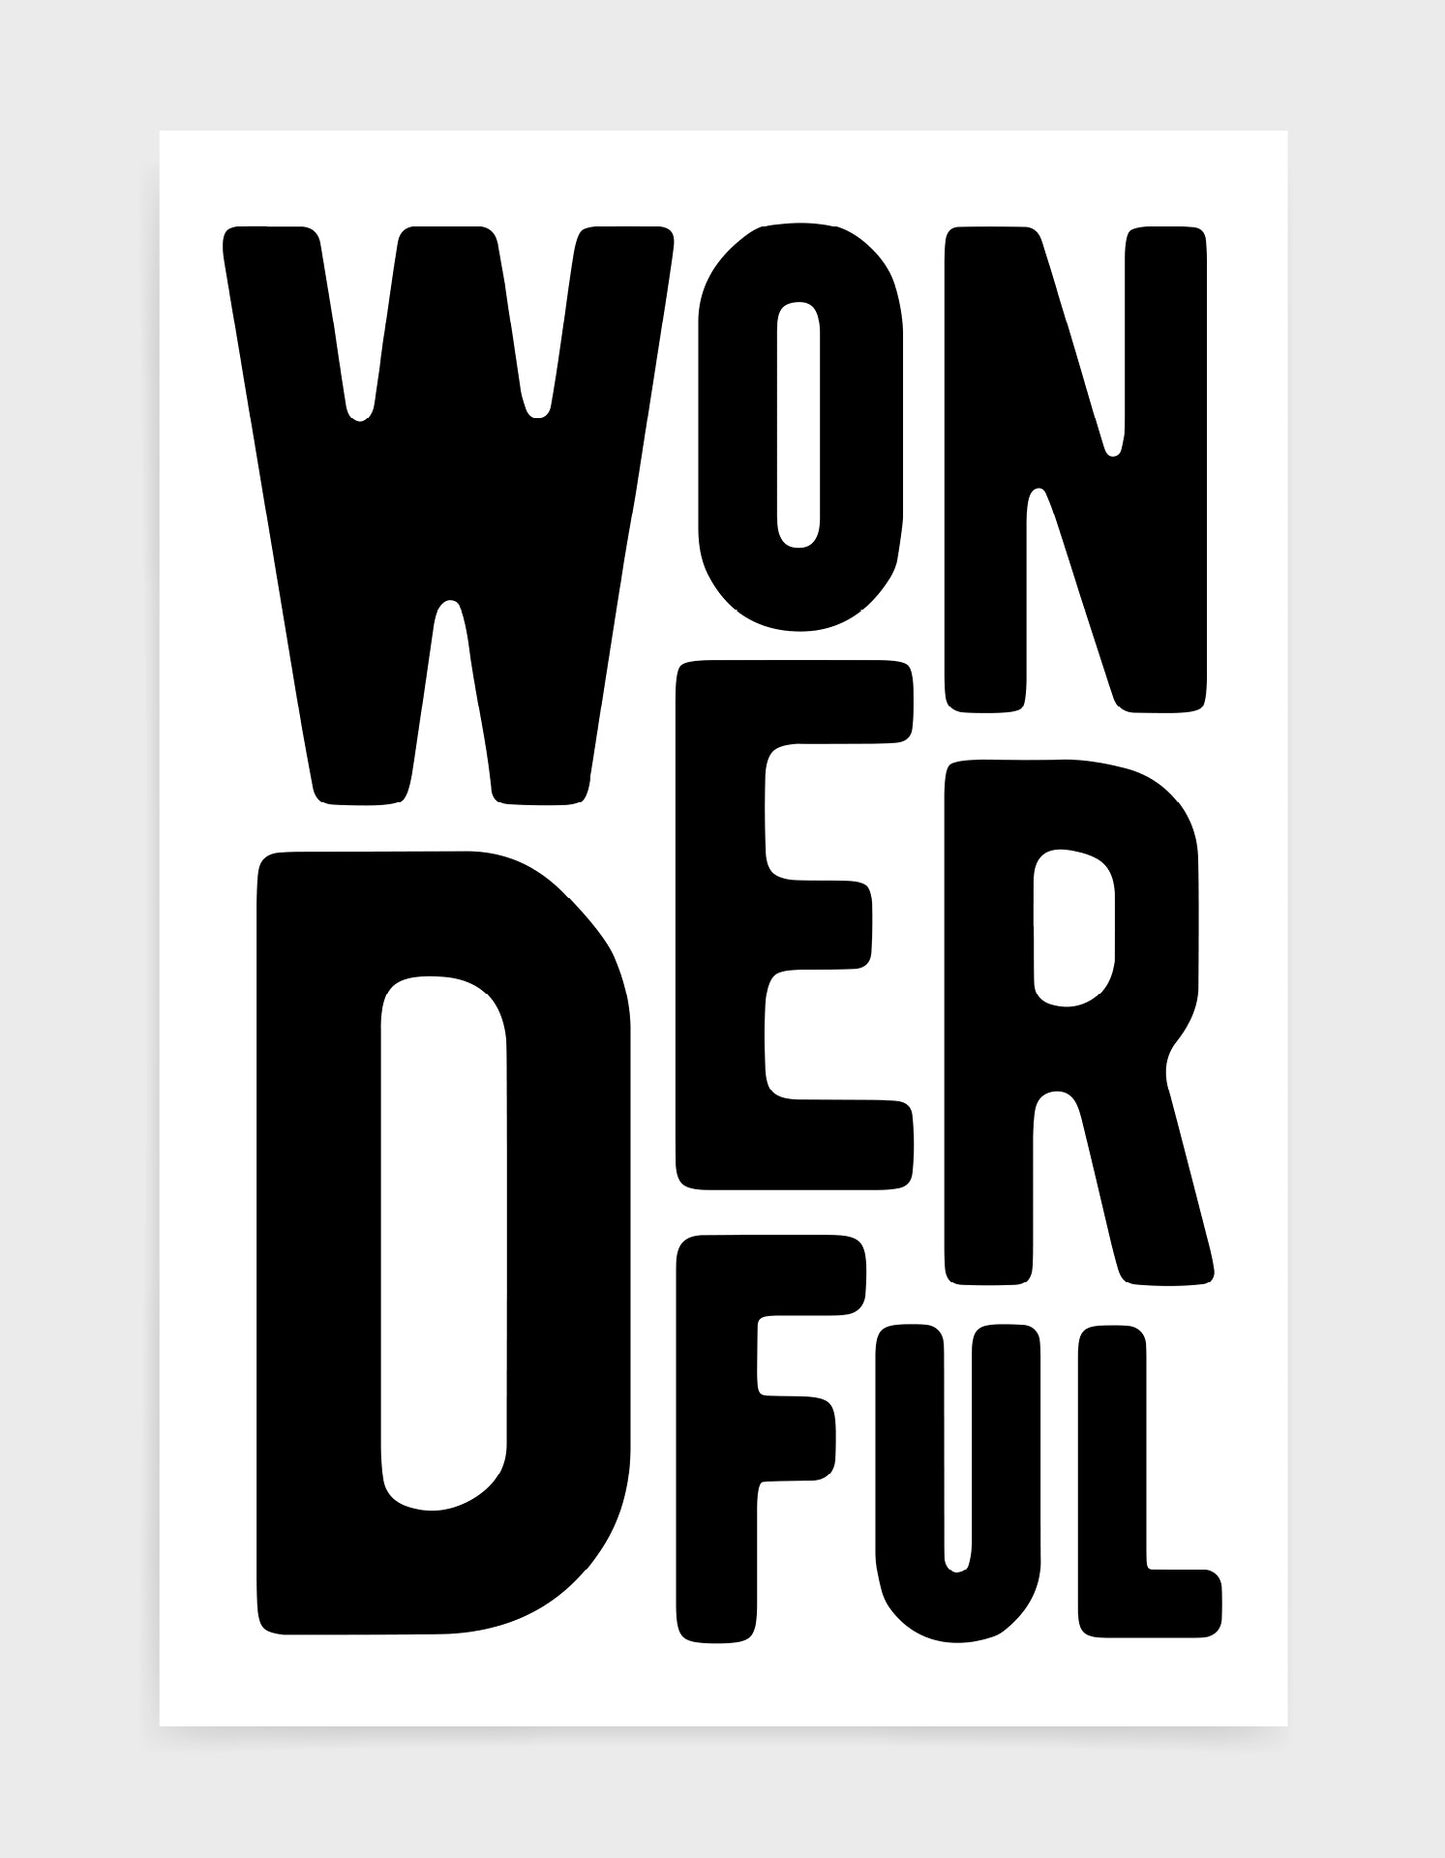 monochrome typography art print of the word wonderful in black text on a black background